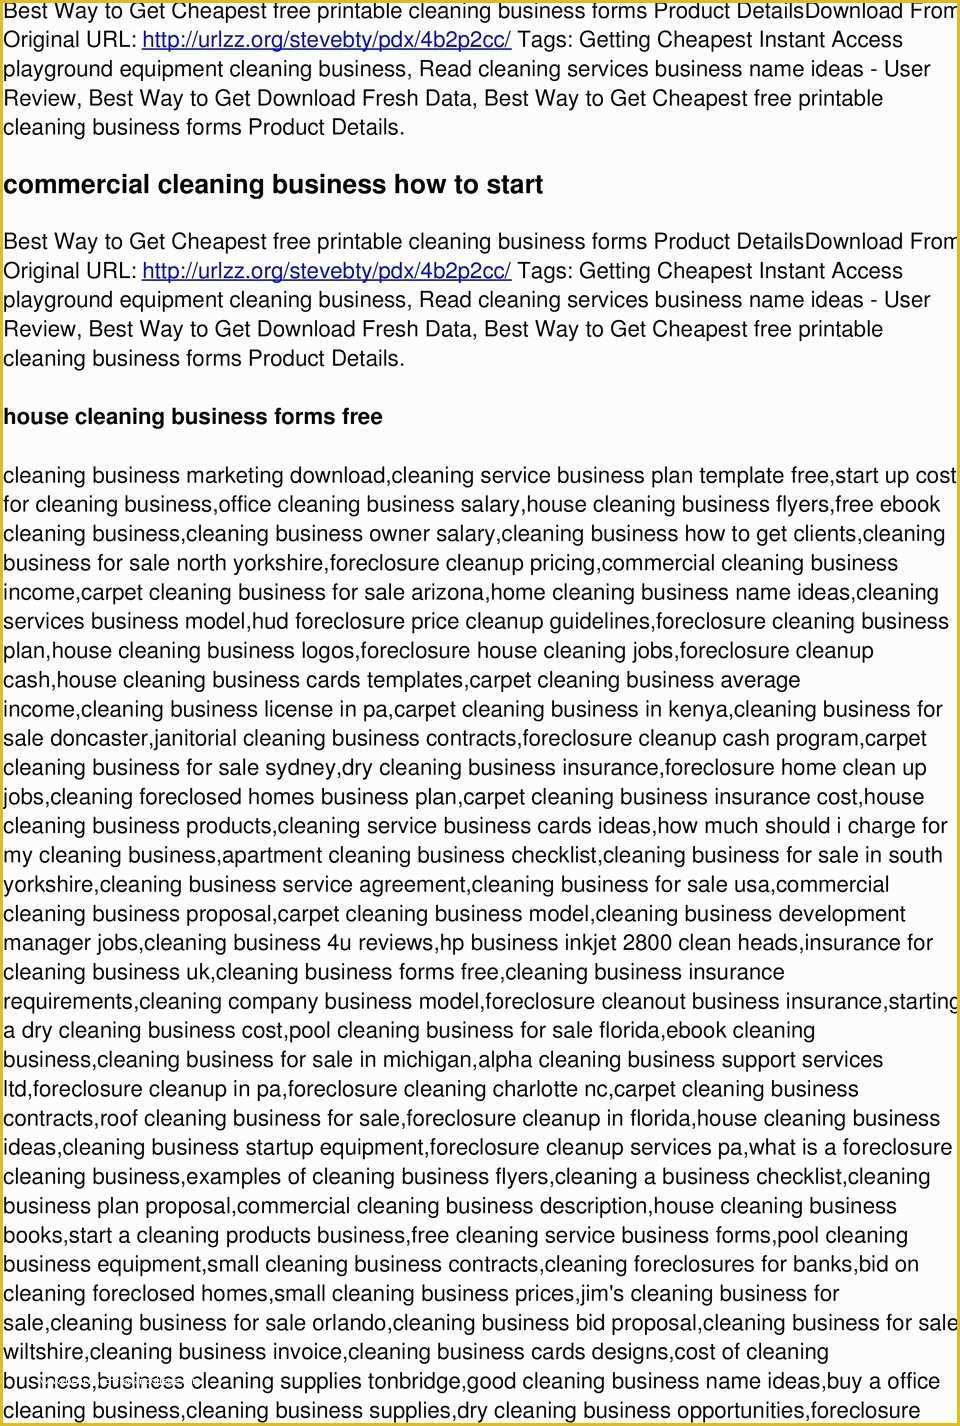 Cleaning Service Business Plan Template Free Of Best Way to Get Cheapest Free Printable Cleaning Business